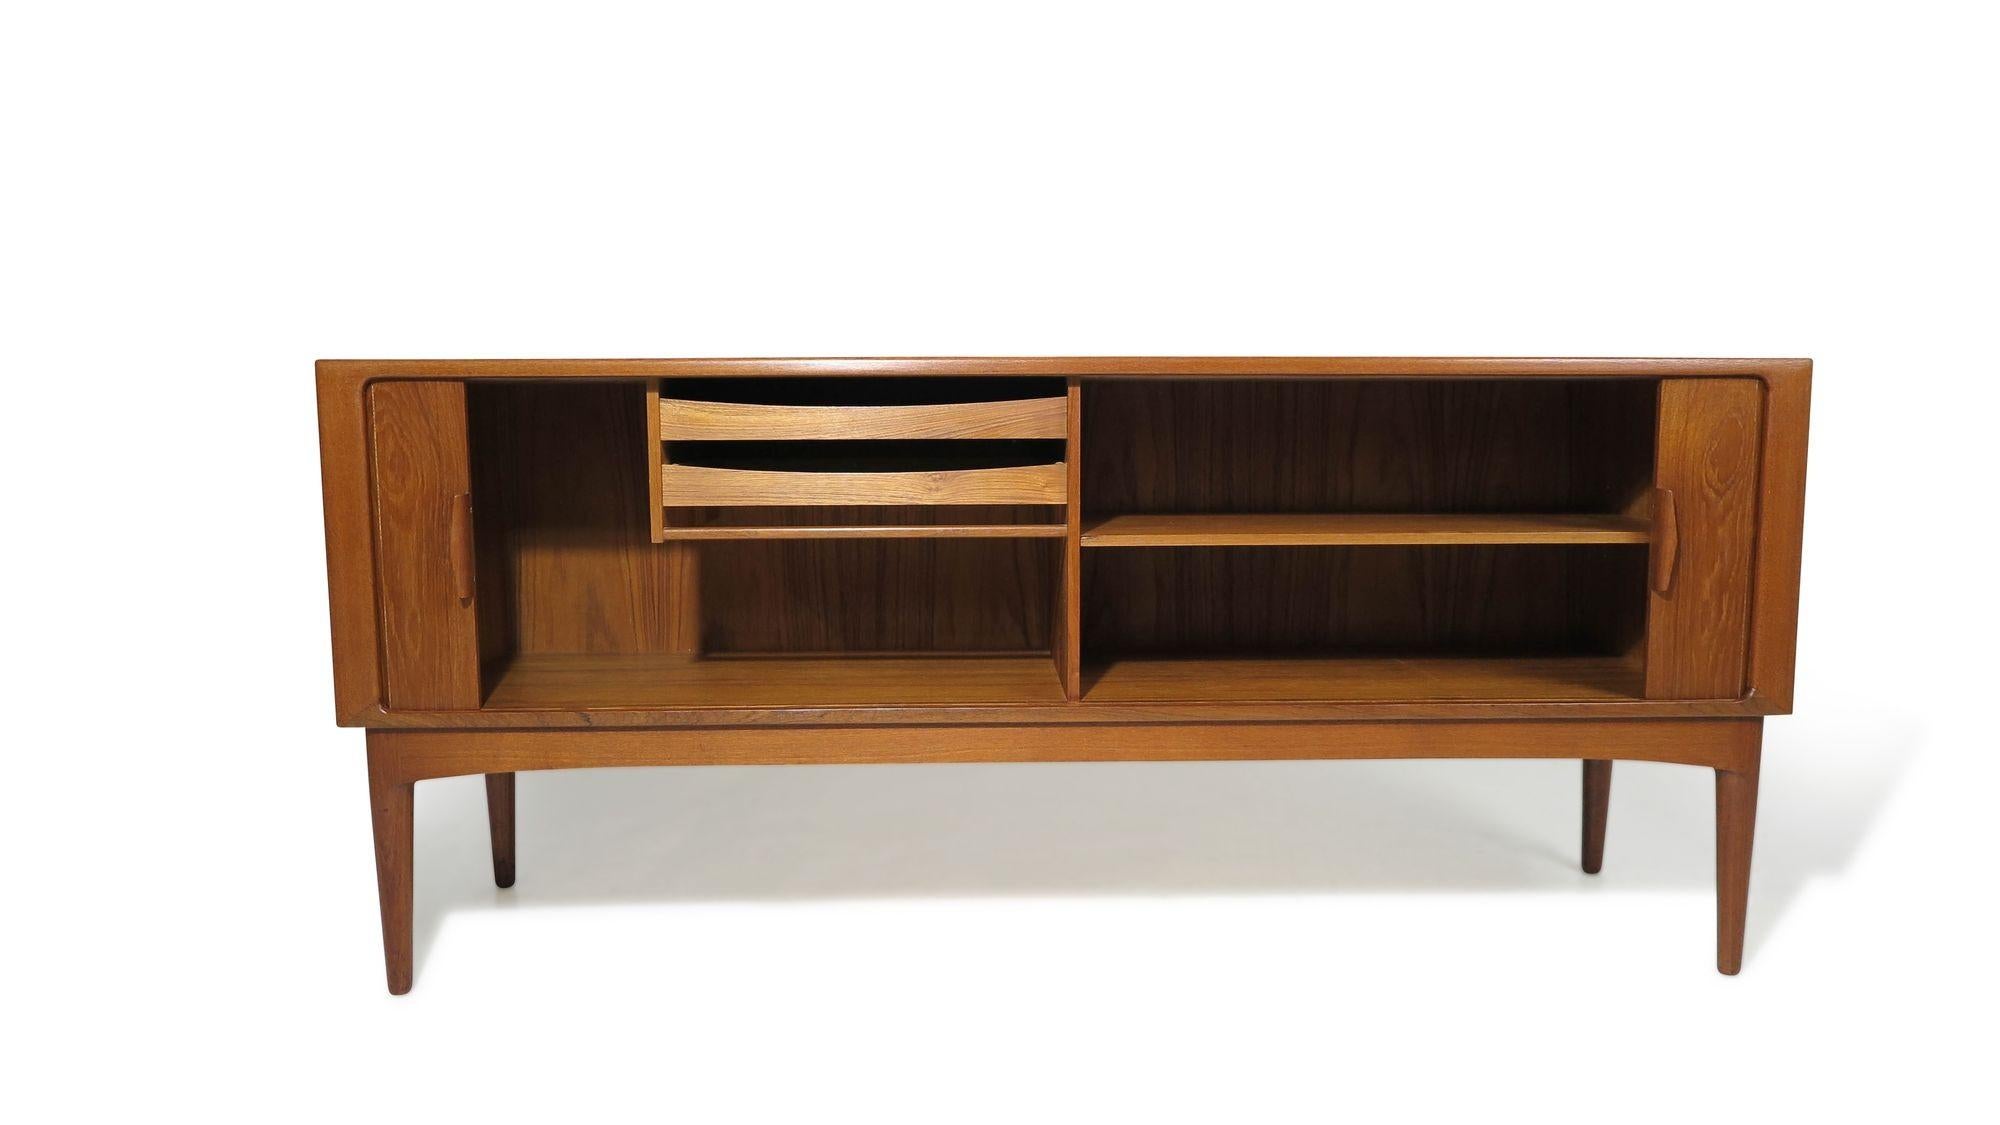 Danish teak credenza designed by Johannes Andersen for Uldum Møbelfabrik, 1955, Denmark. This finely crafted cabinet, made of teak with mitered corners, features tambour doors with sculpted pulls. These doors open to reveal an interior with